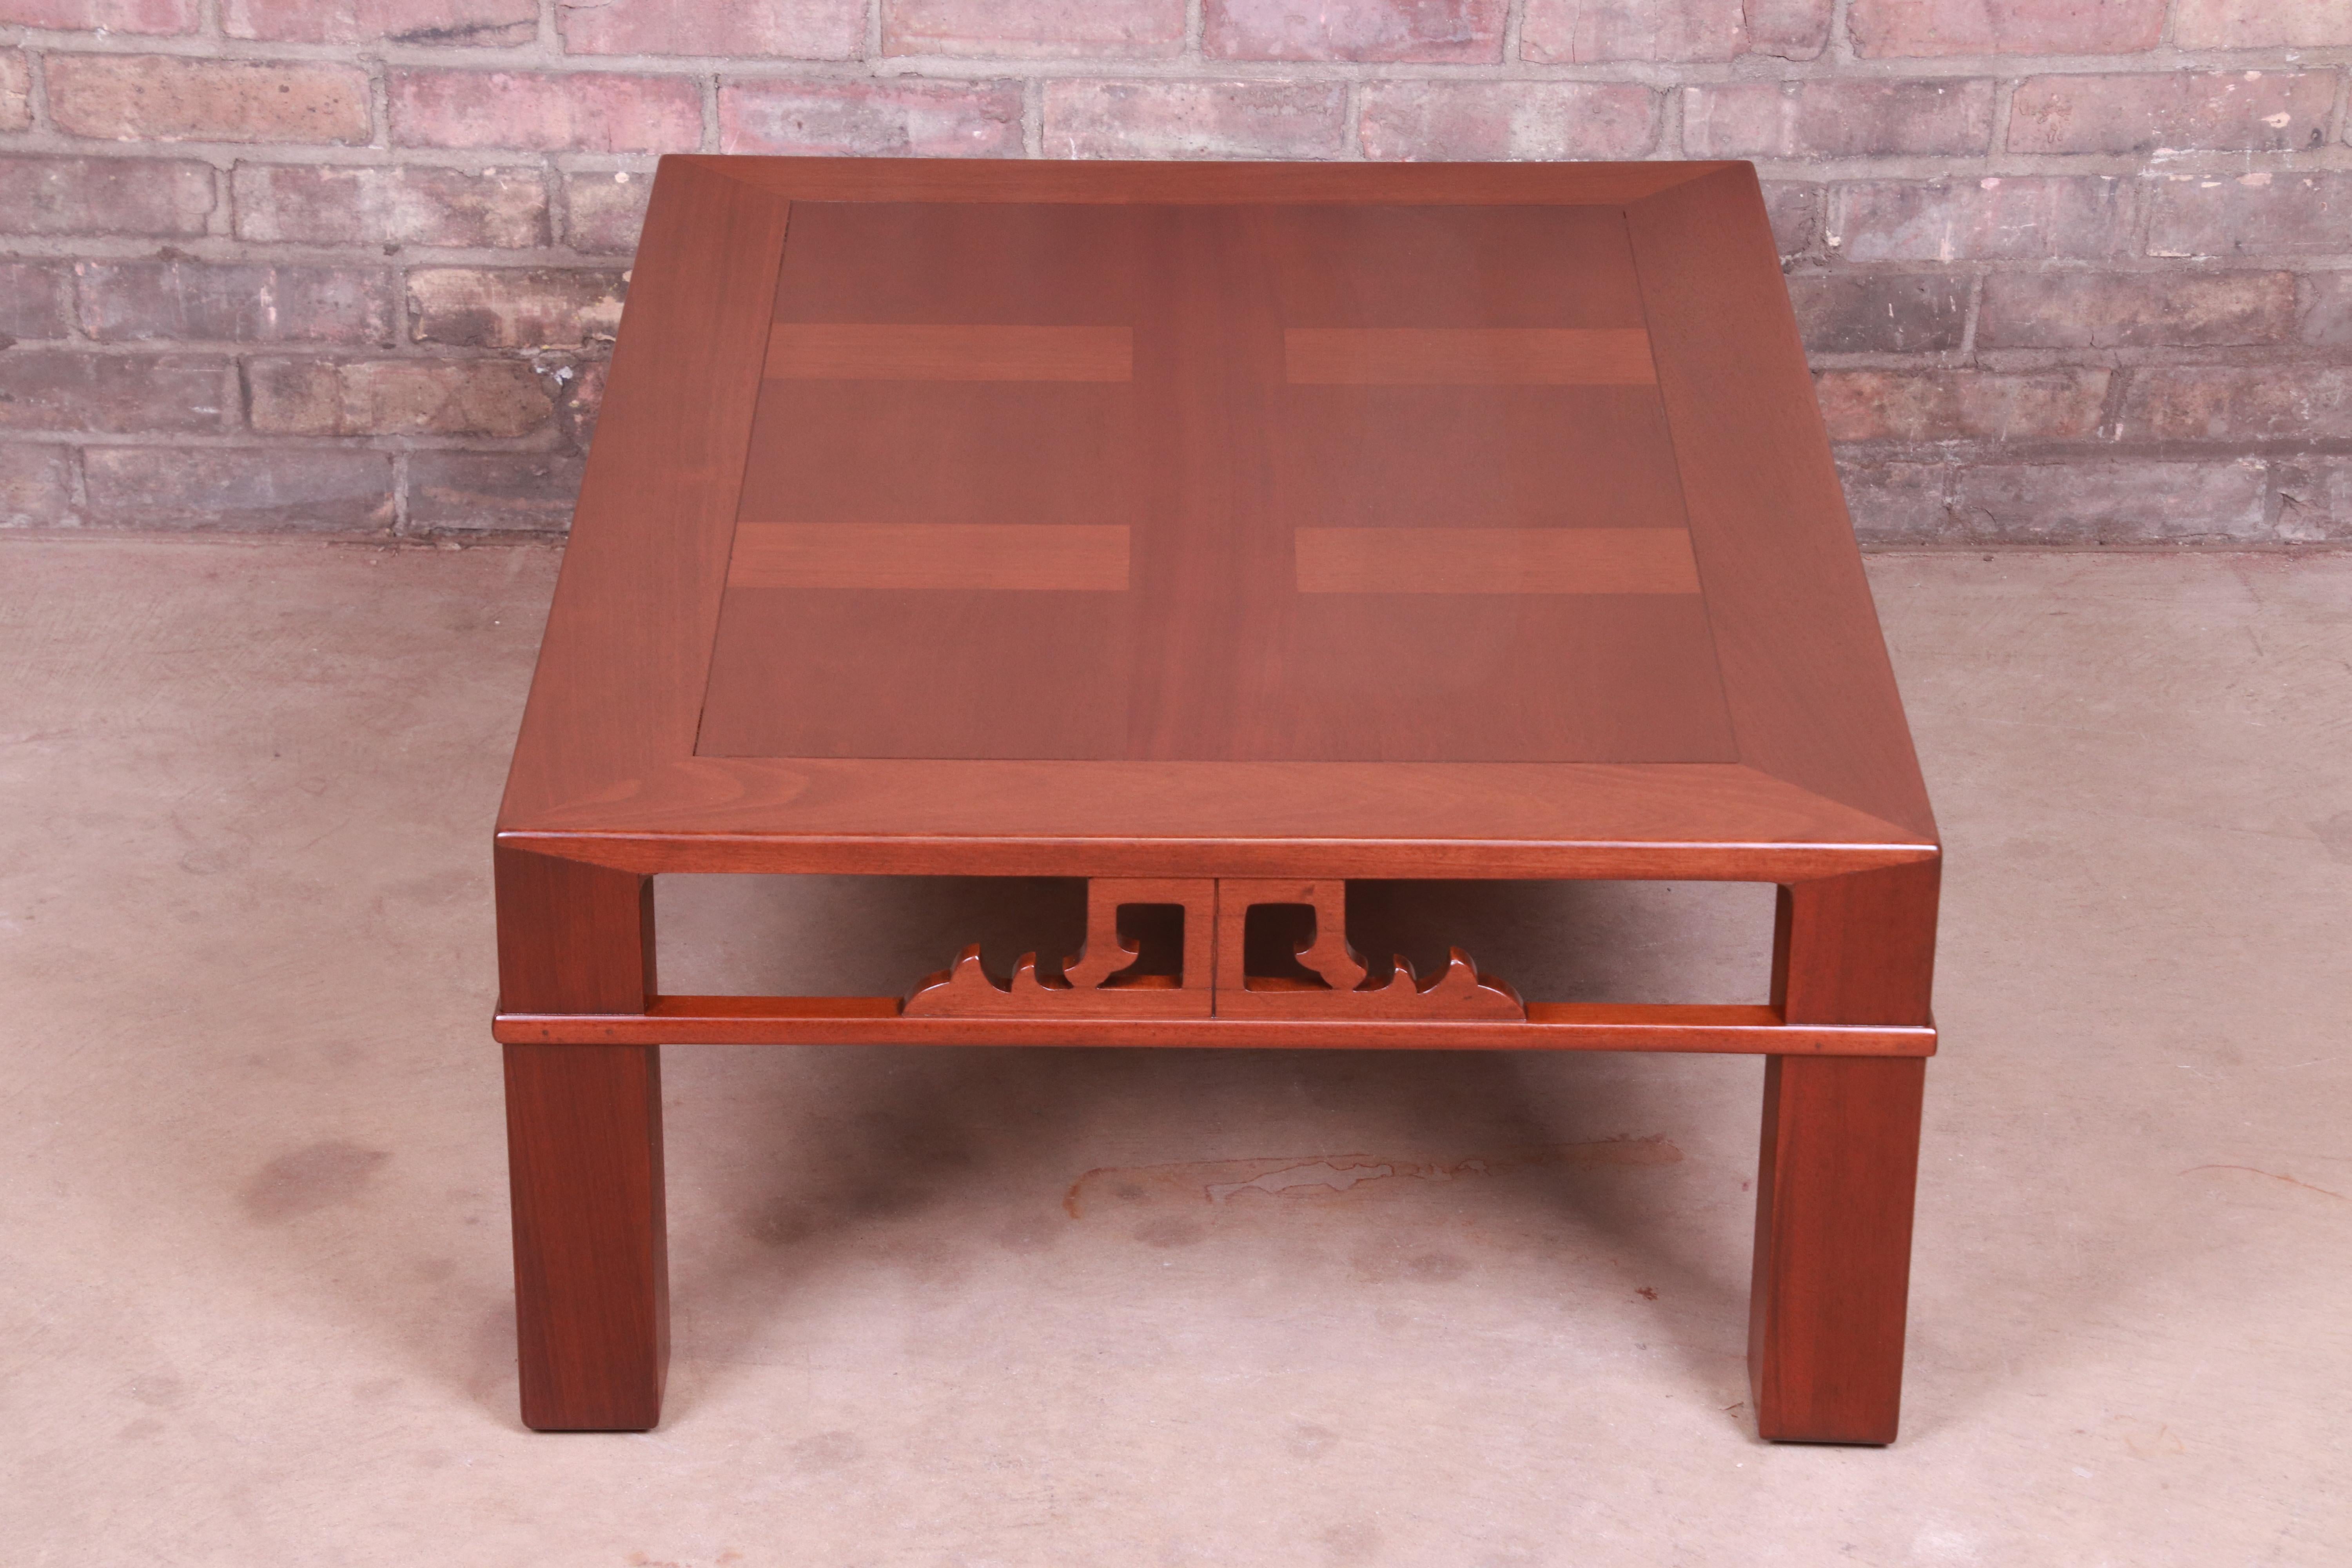 Baker Furniture Chinoiserie Carved Mahogany Coffee Table, Newly Refinished For Sale 3